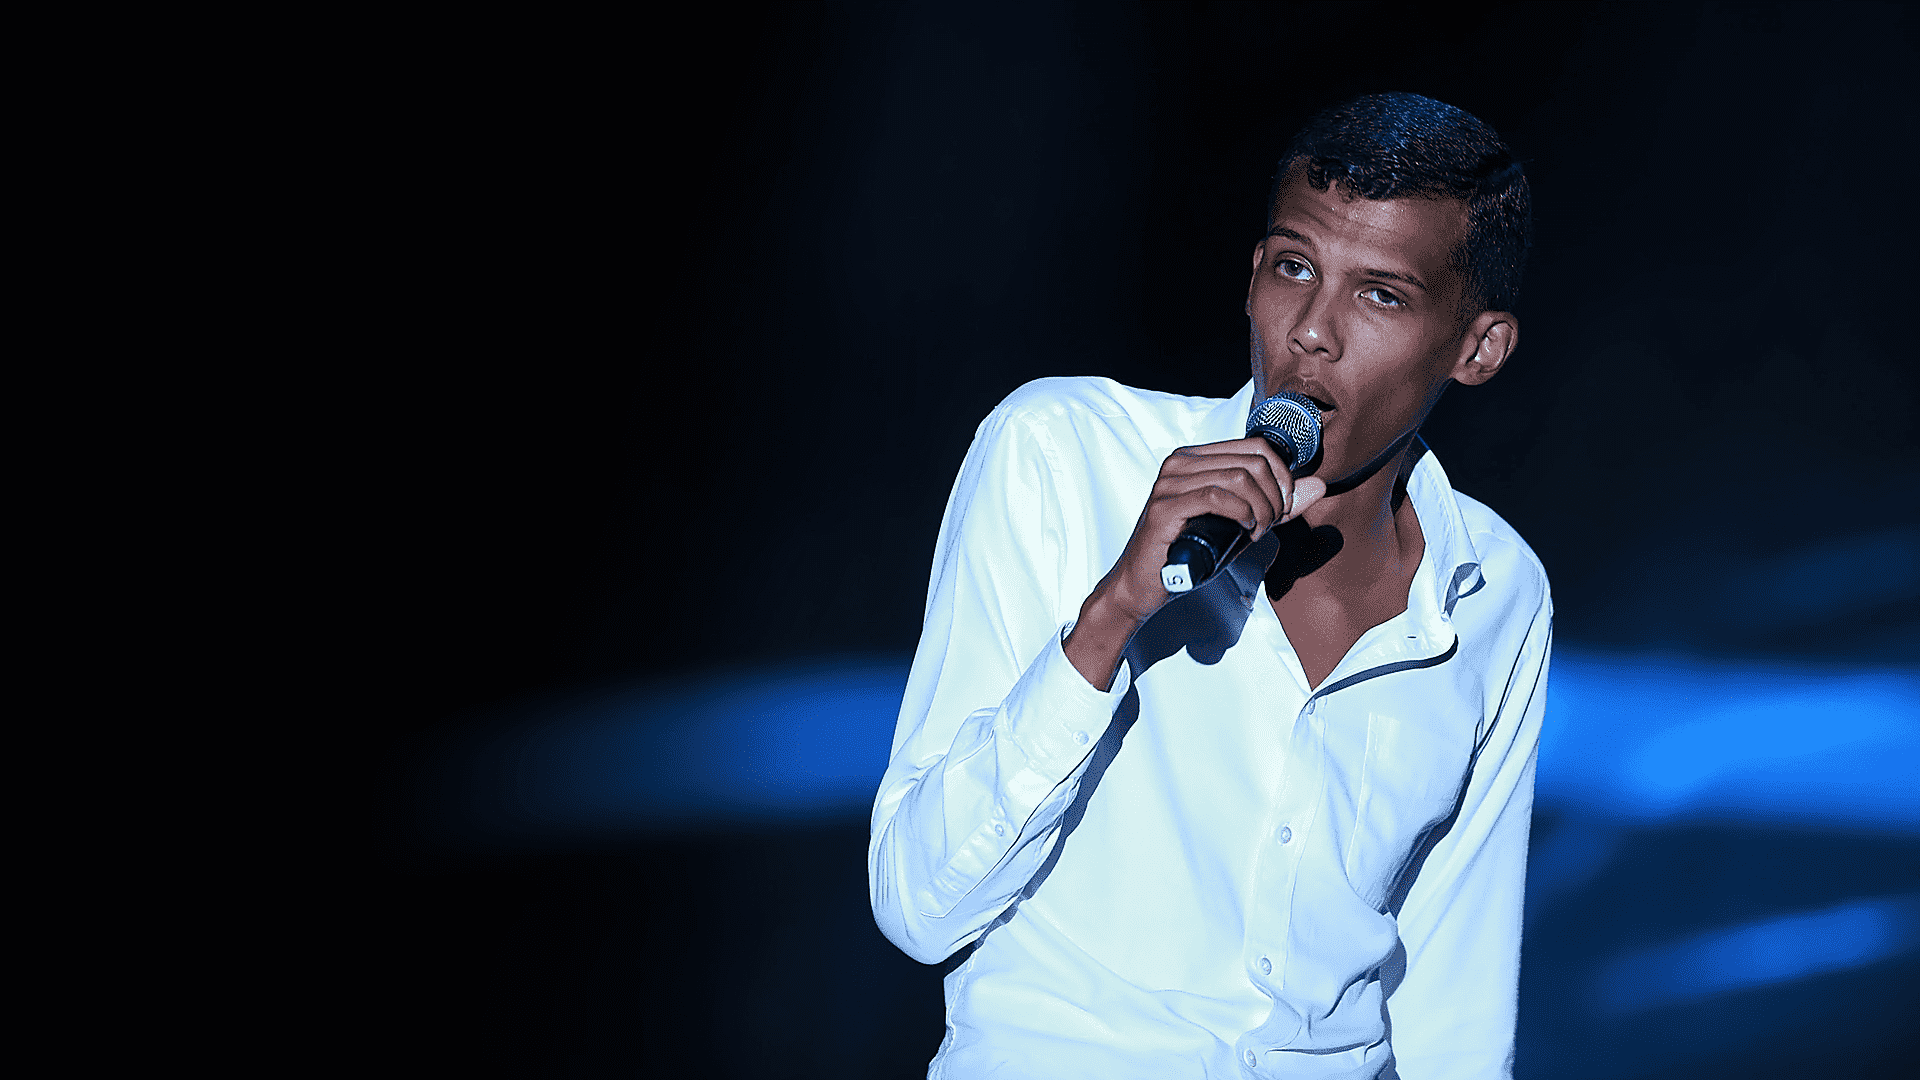 Stromae Performs 'Formidable' at the World Music Awards.